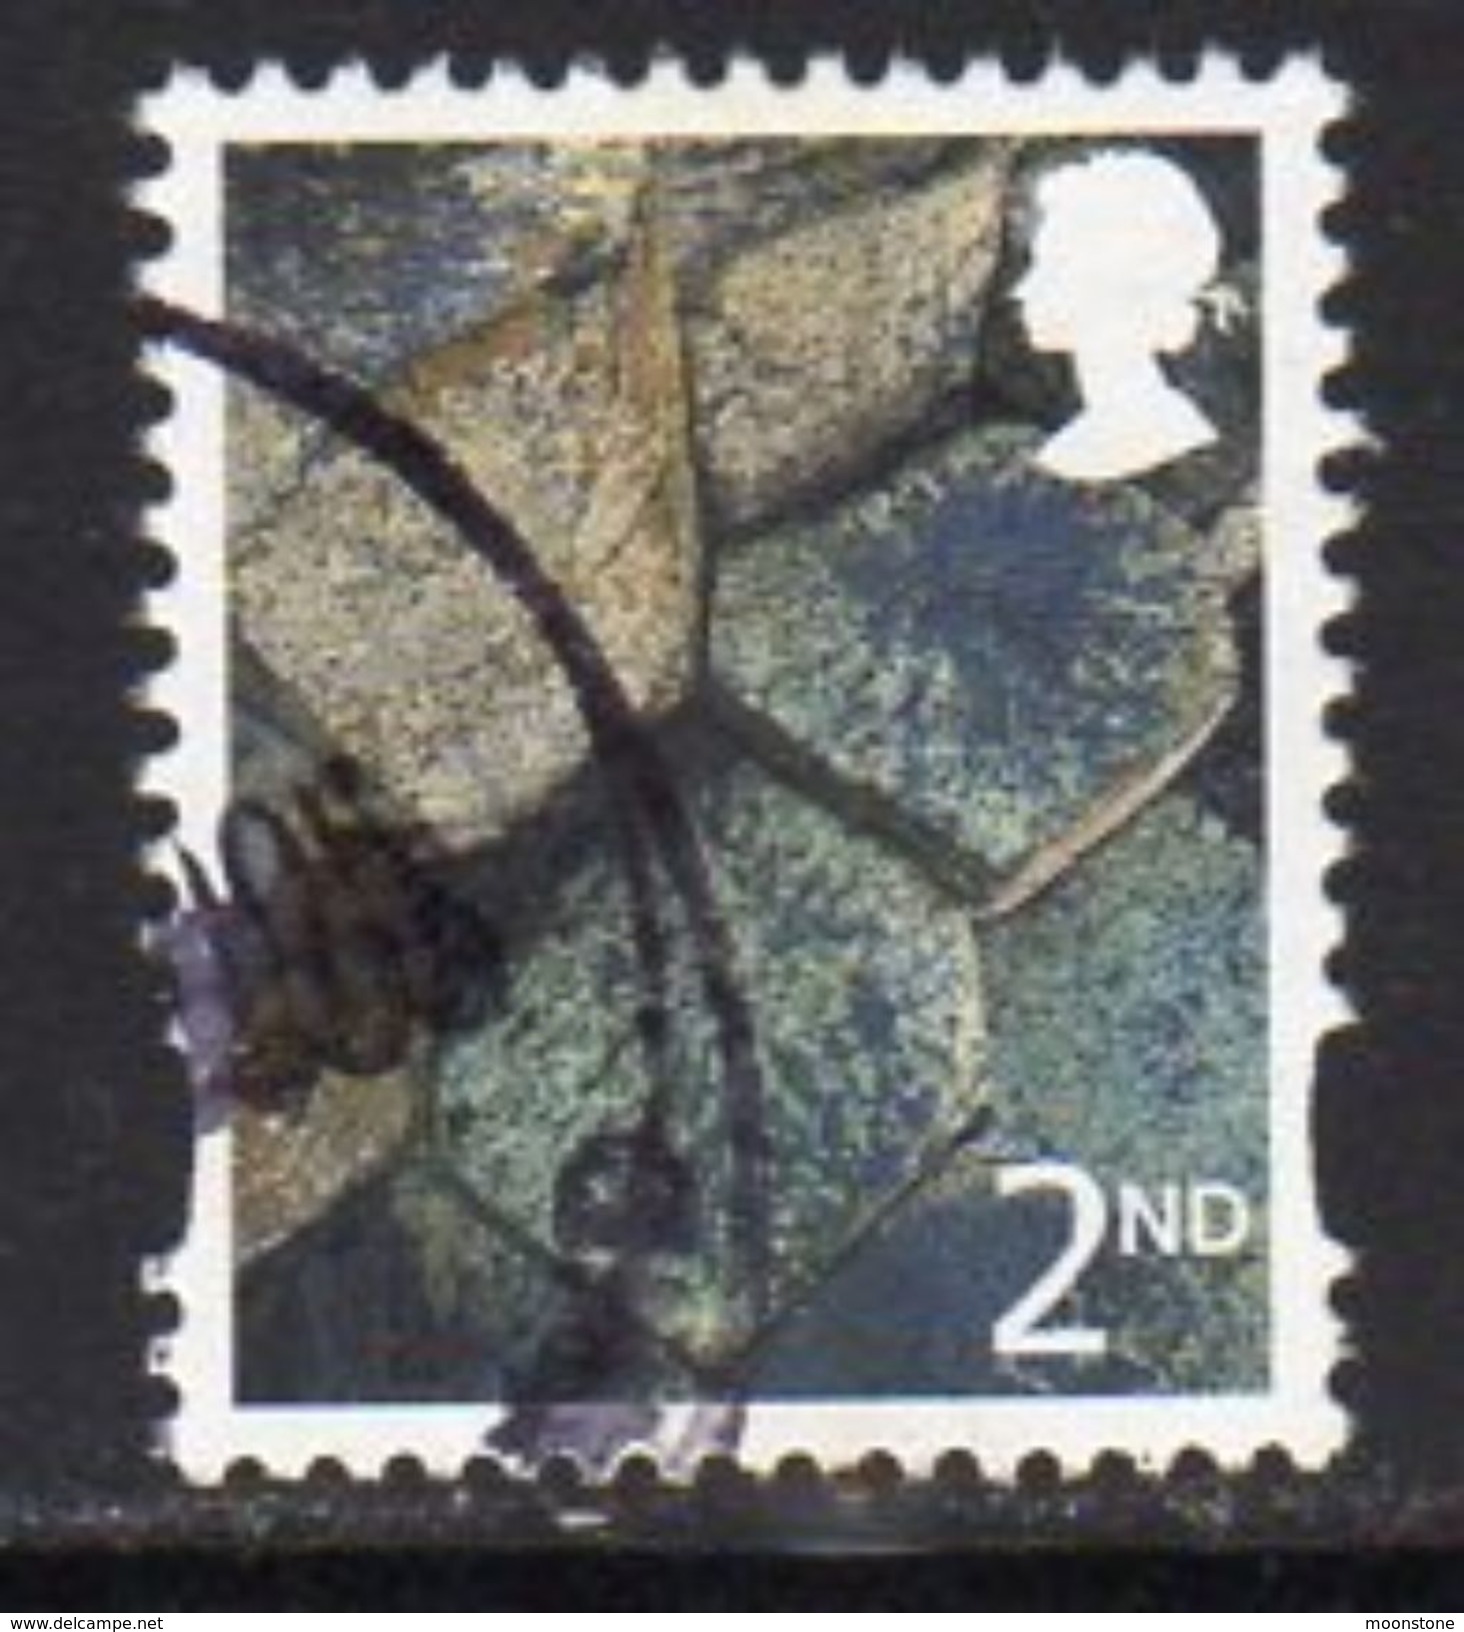 GB N. Ireland 2003-17 2nd Class With Border Regional Country, Used, SG 94 - Irlande Du Nord